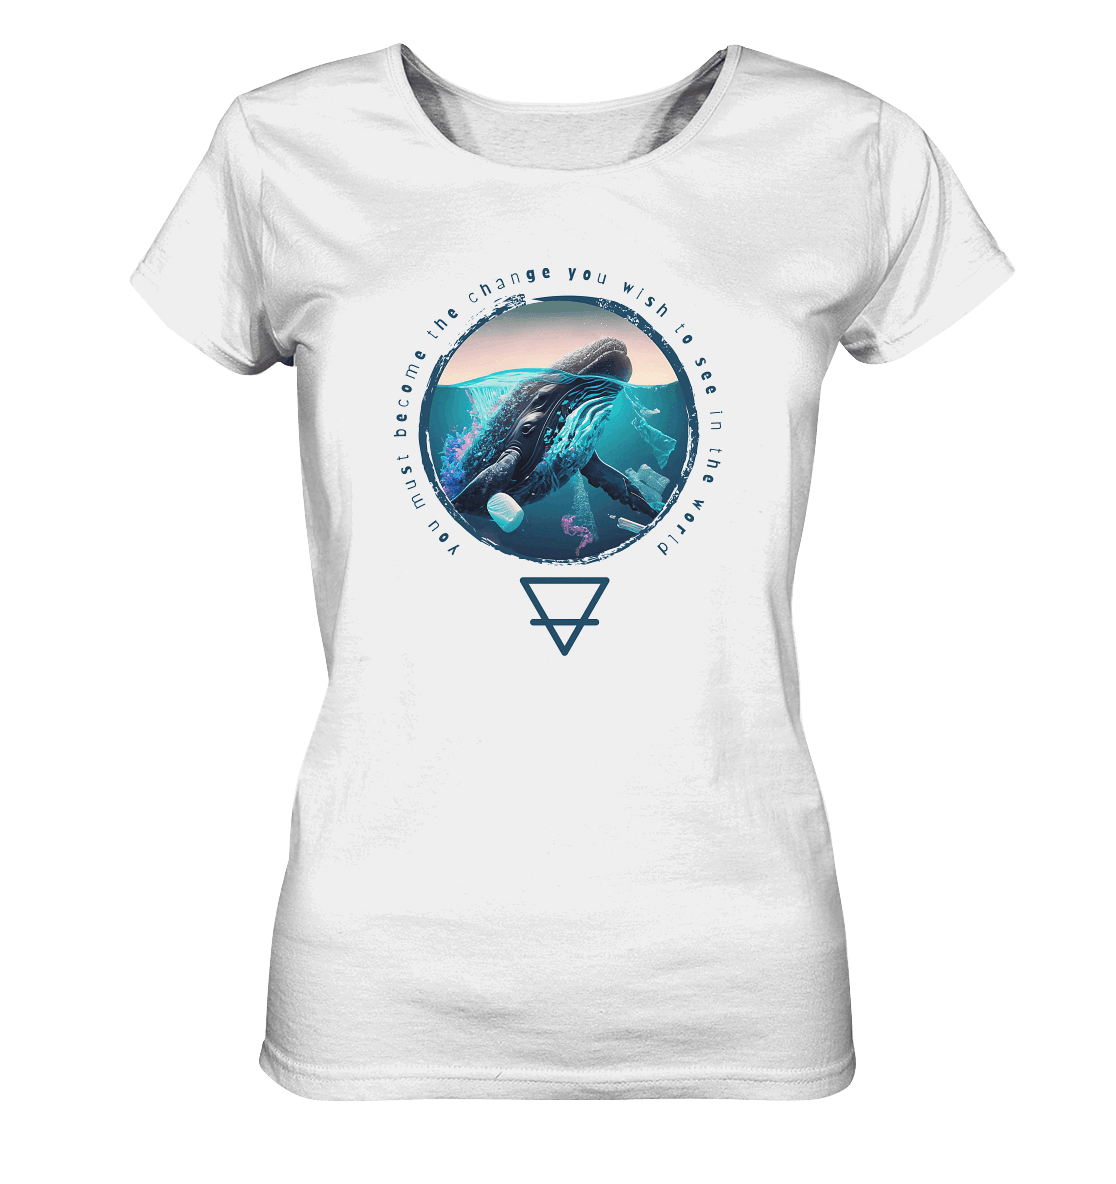 Nature - You must become the change you wish to see in the world  - Ladies Organic Shirt